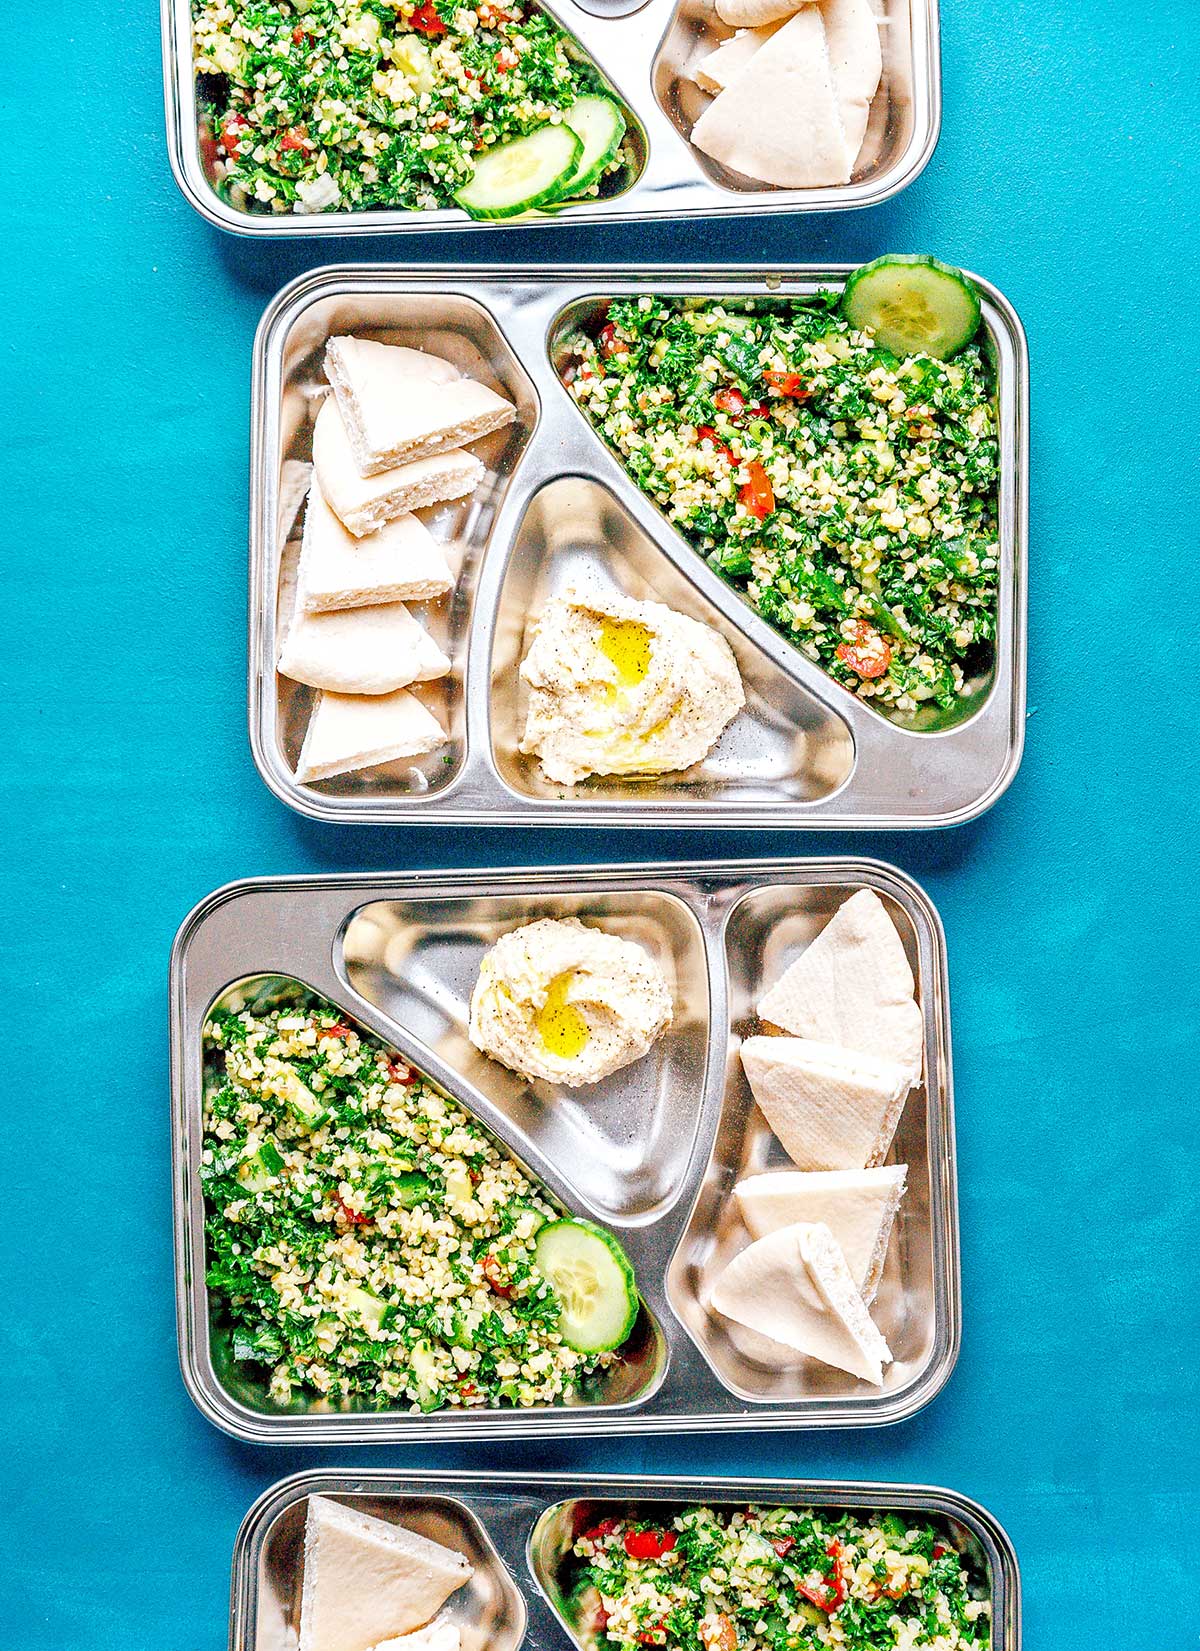 Four meal prep containers on a blue background filled with tabbouleh, hummus, and pita bread